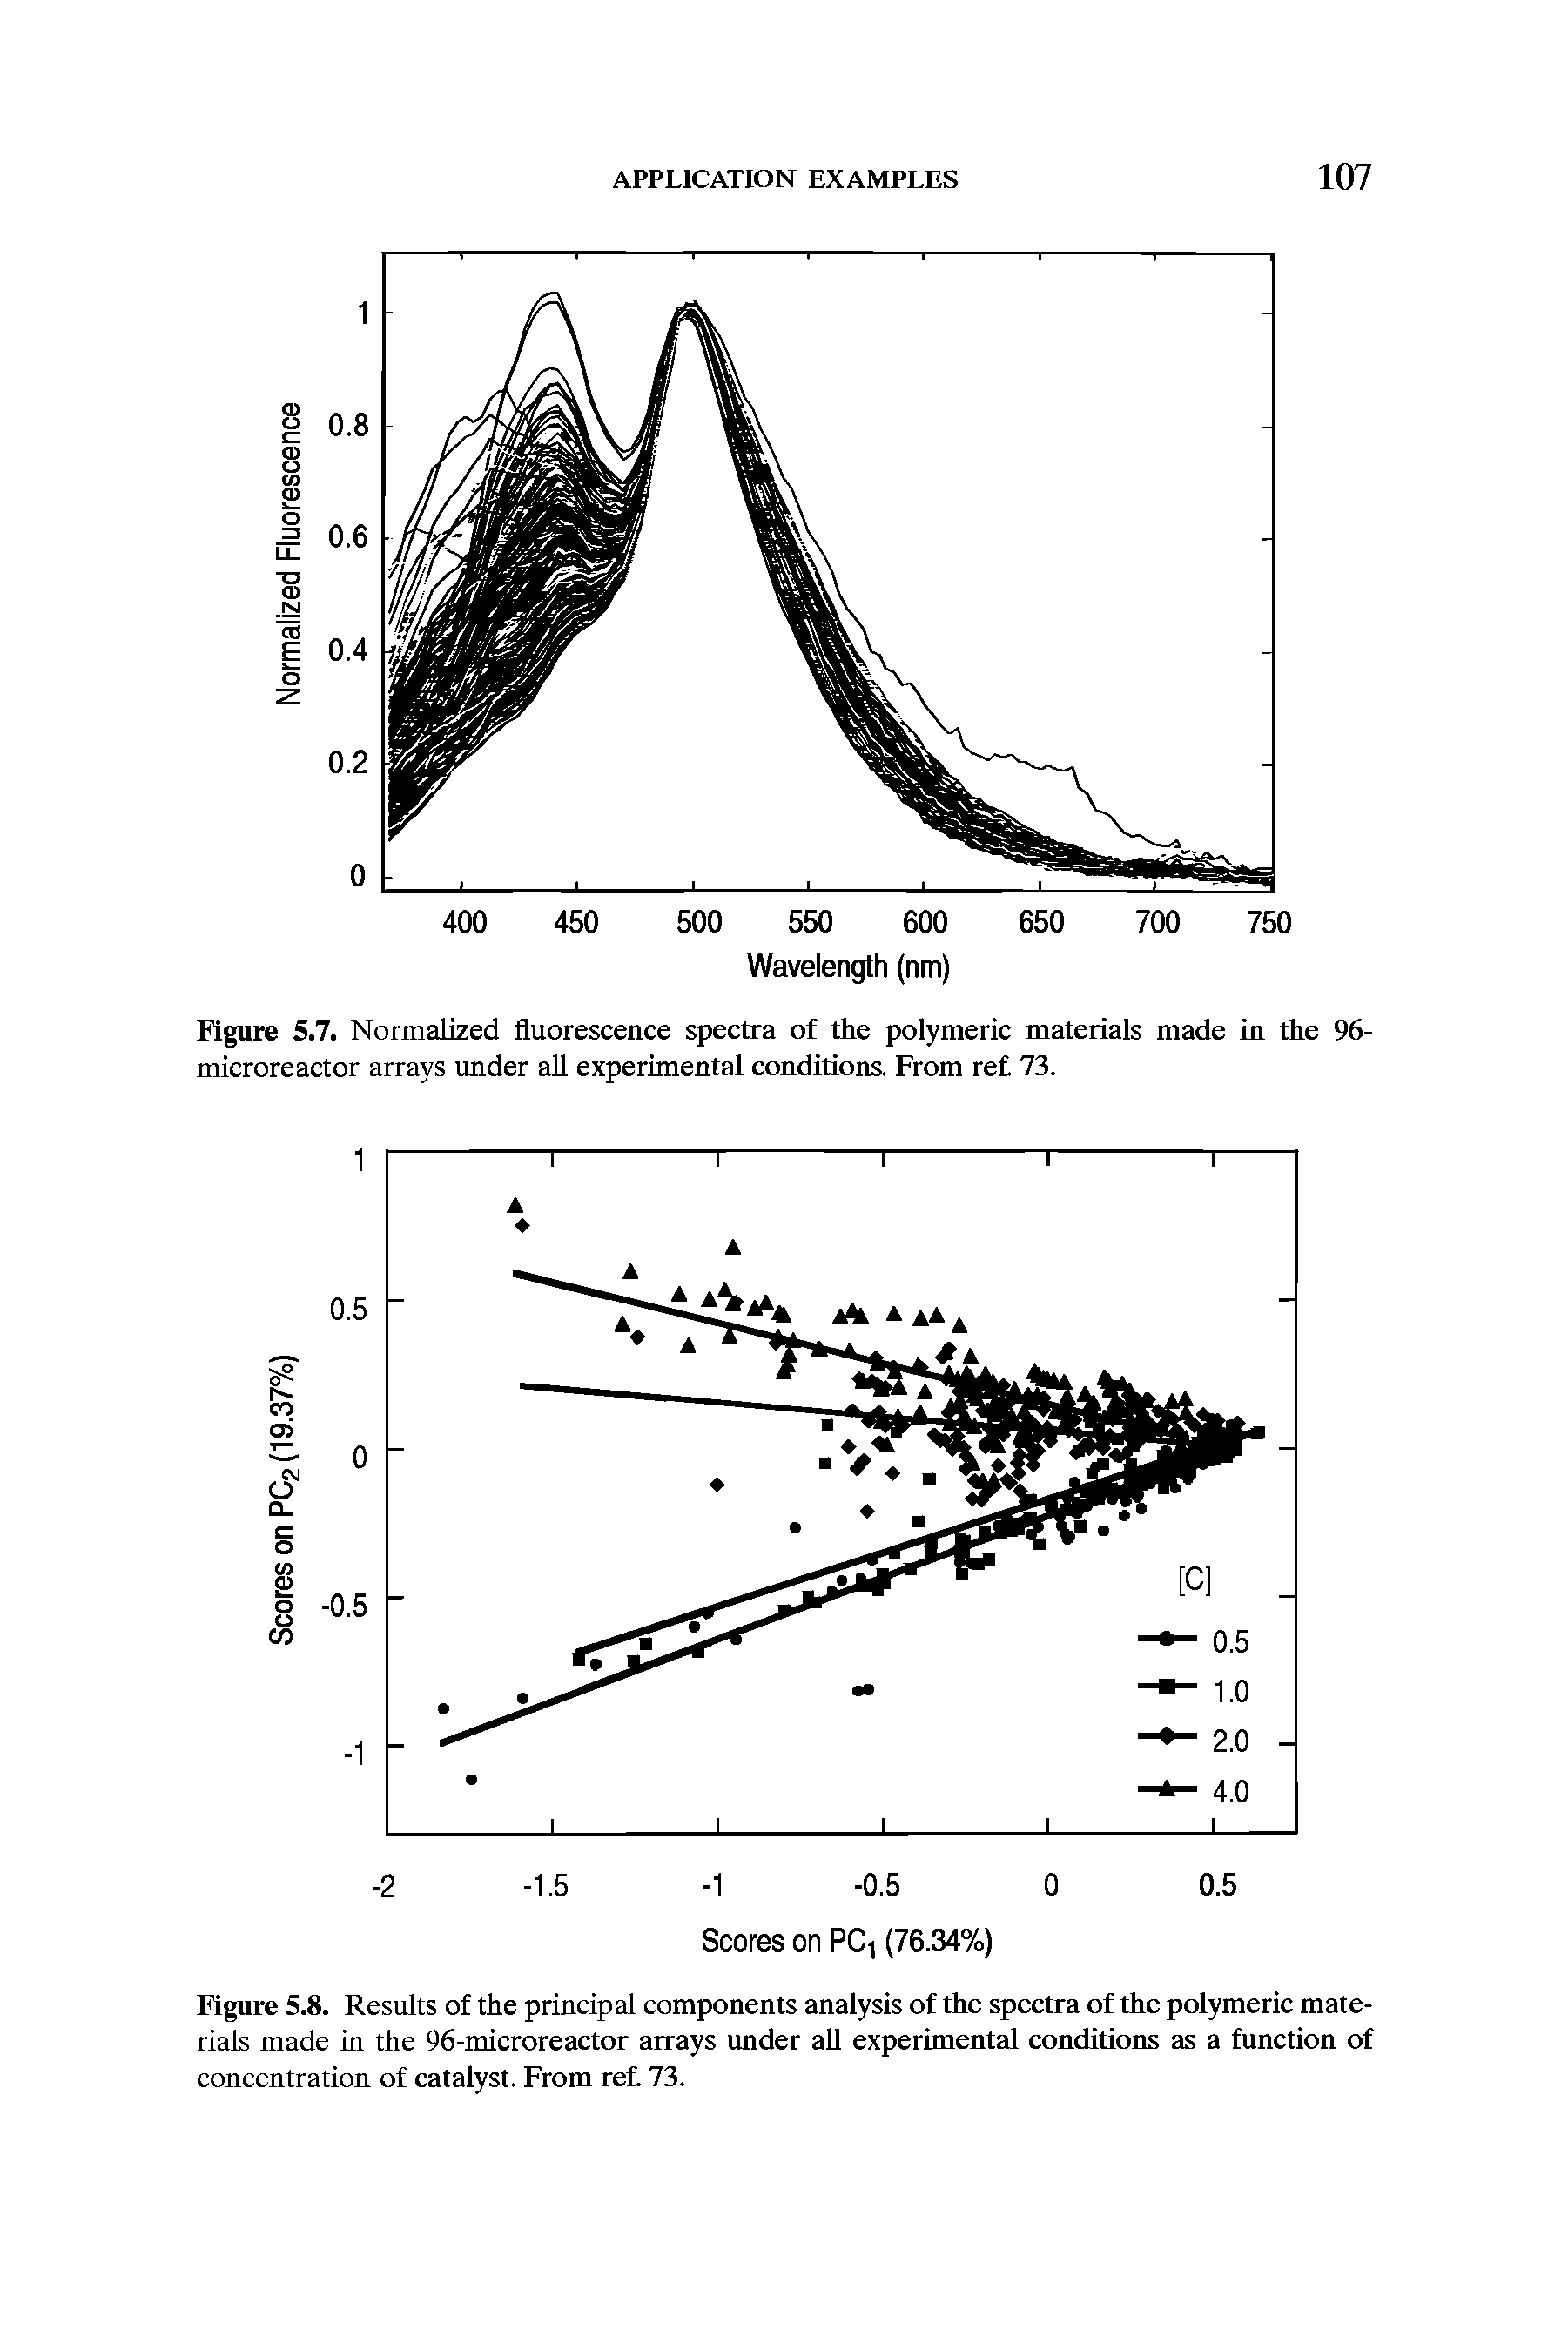 Figure 5.7. Normalized fluorescence spectra of the polymeric materials made in the 96-microreactor arrays under all experimental conditions. From ret 73.